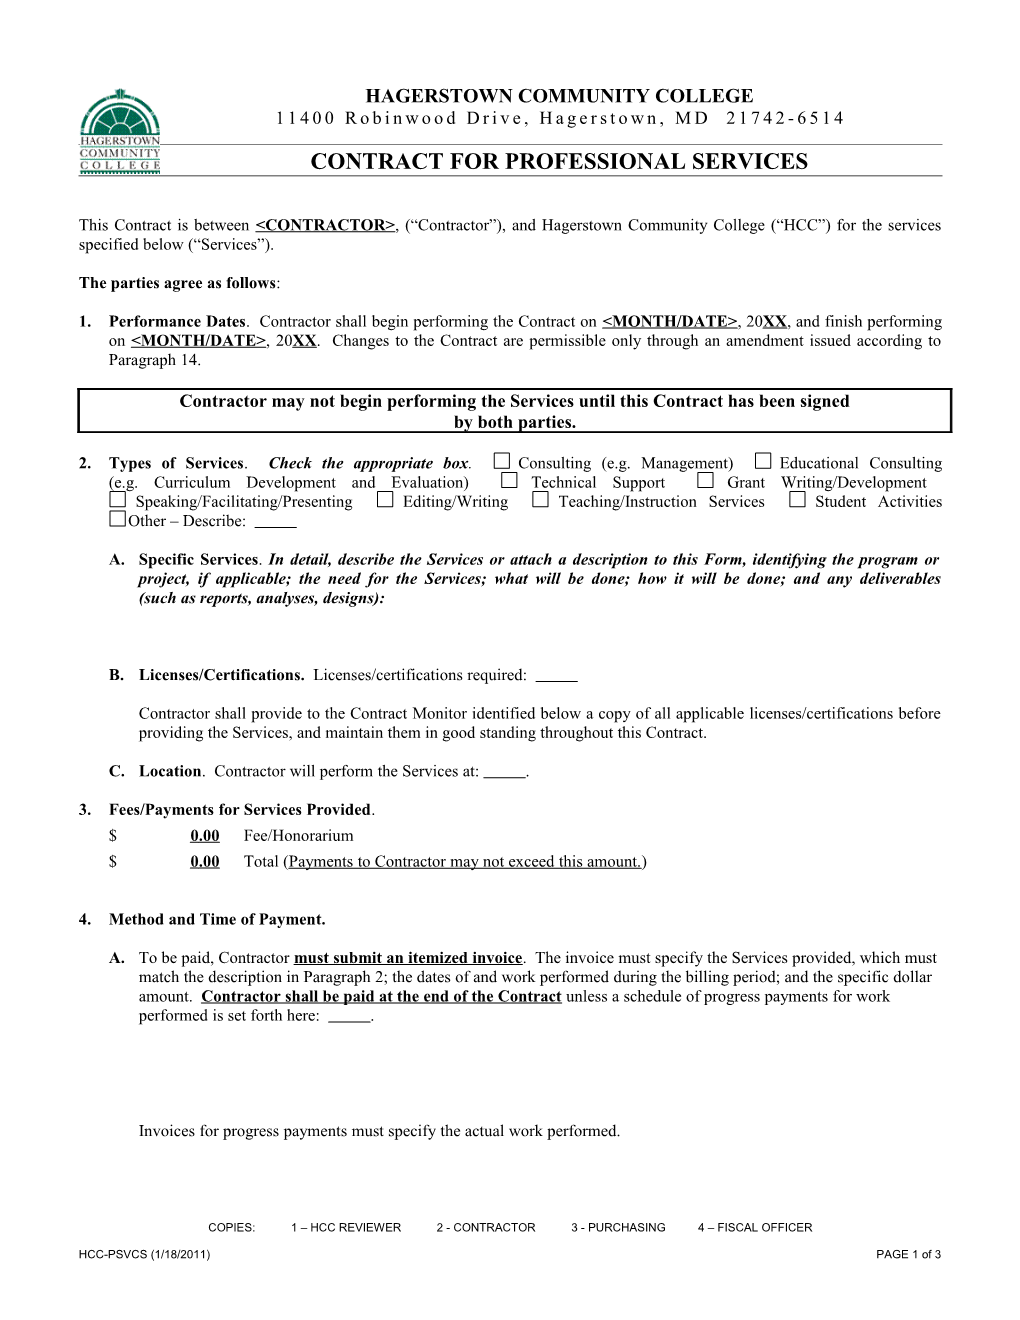 Contract for Professional Services